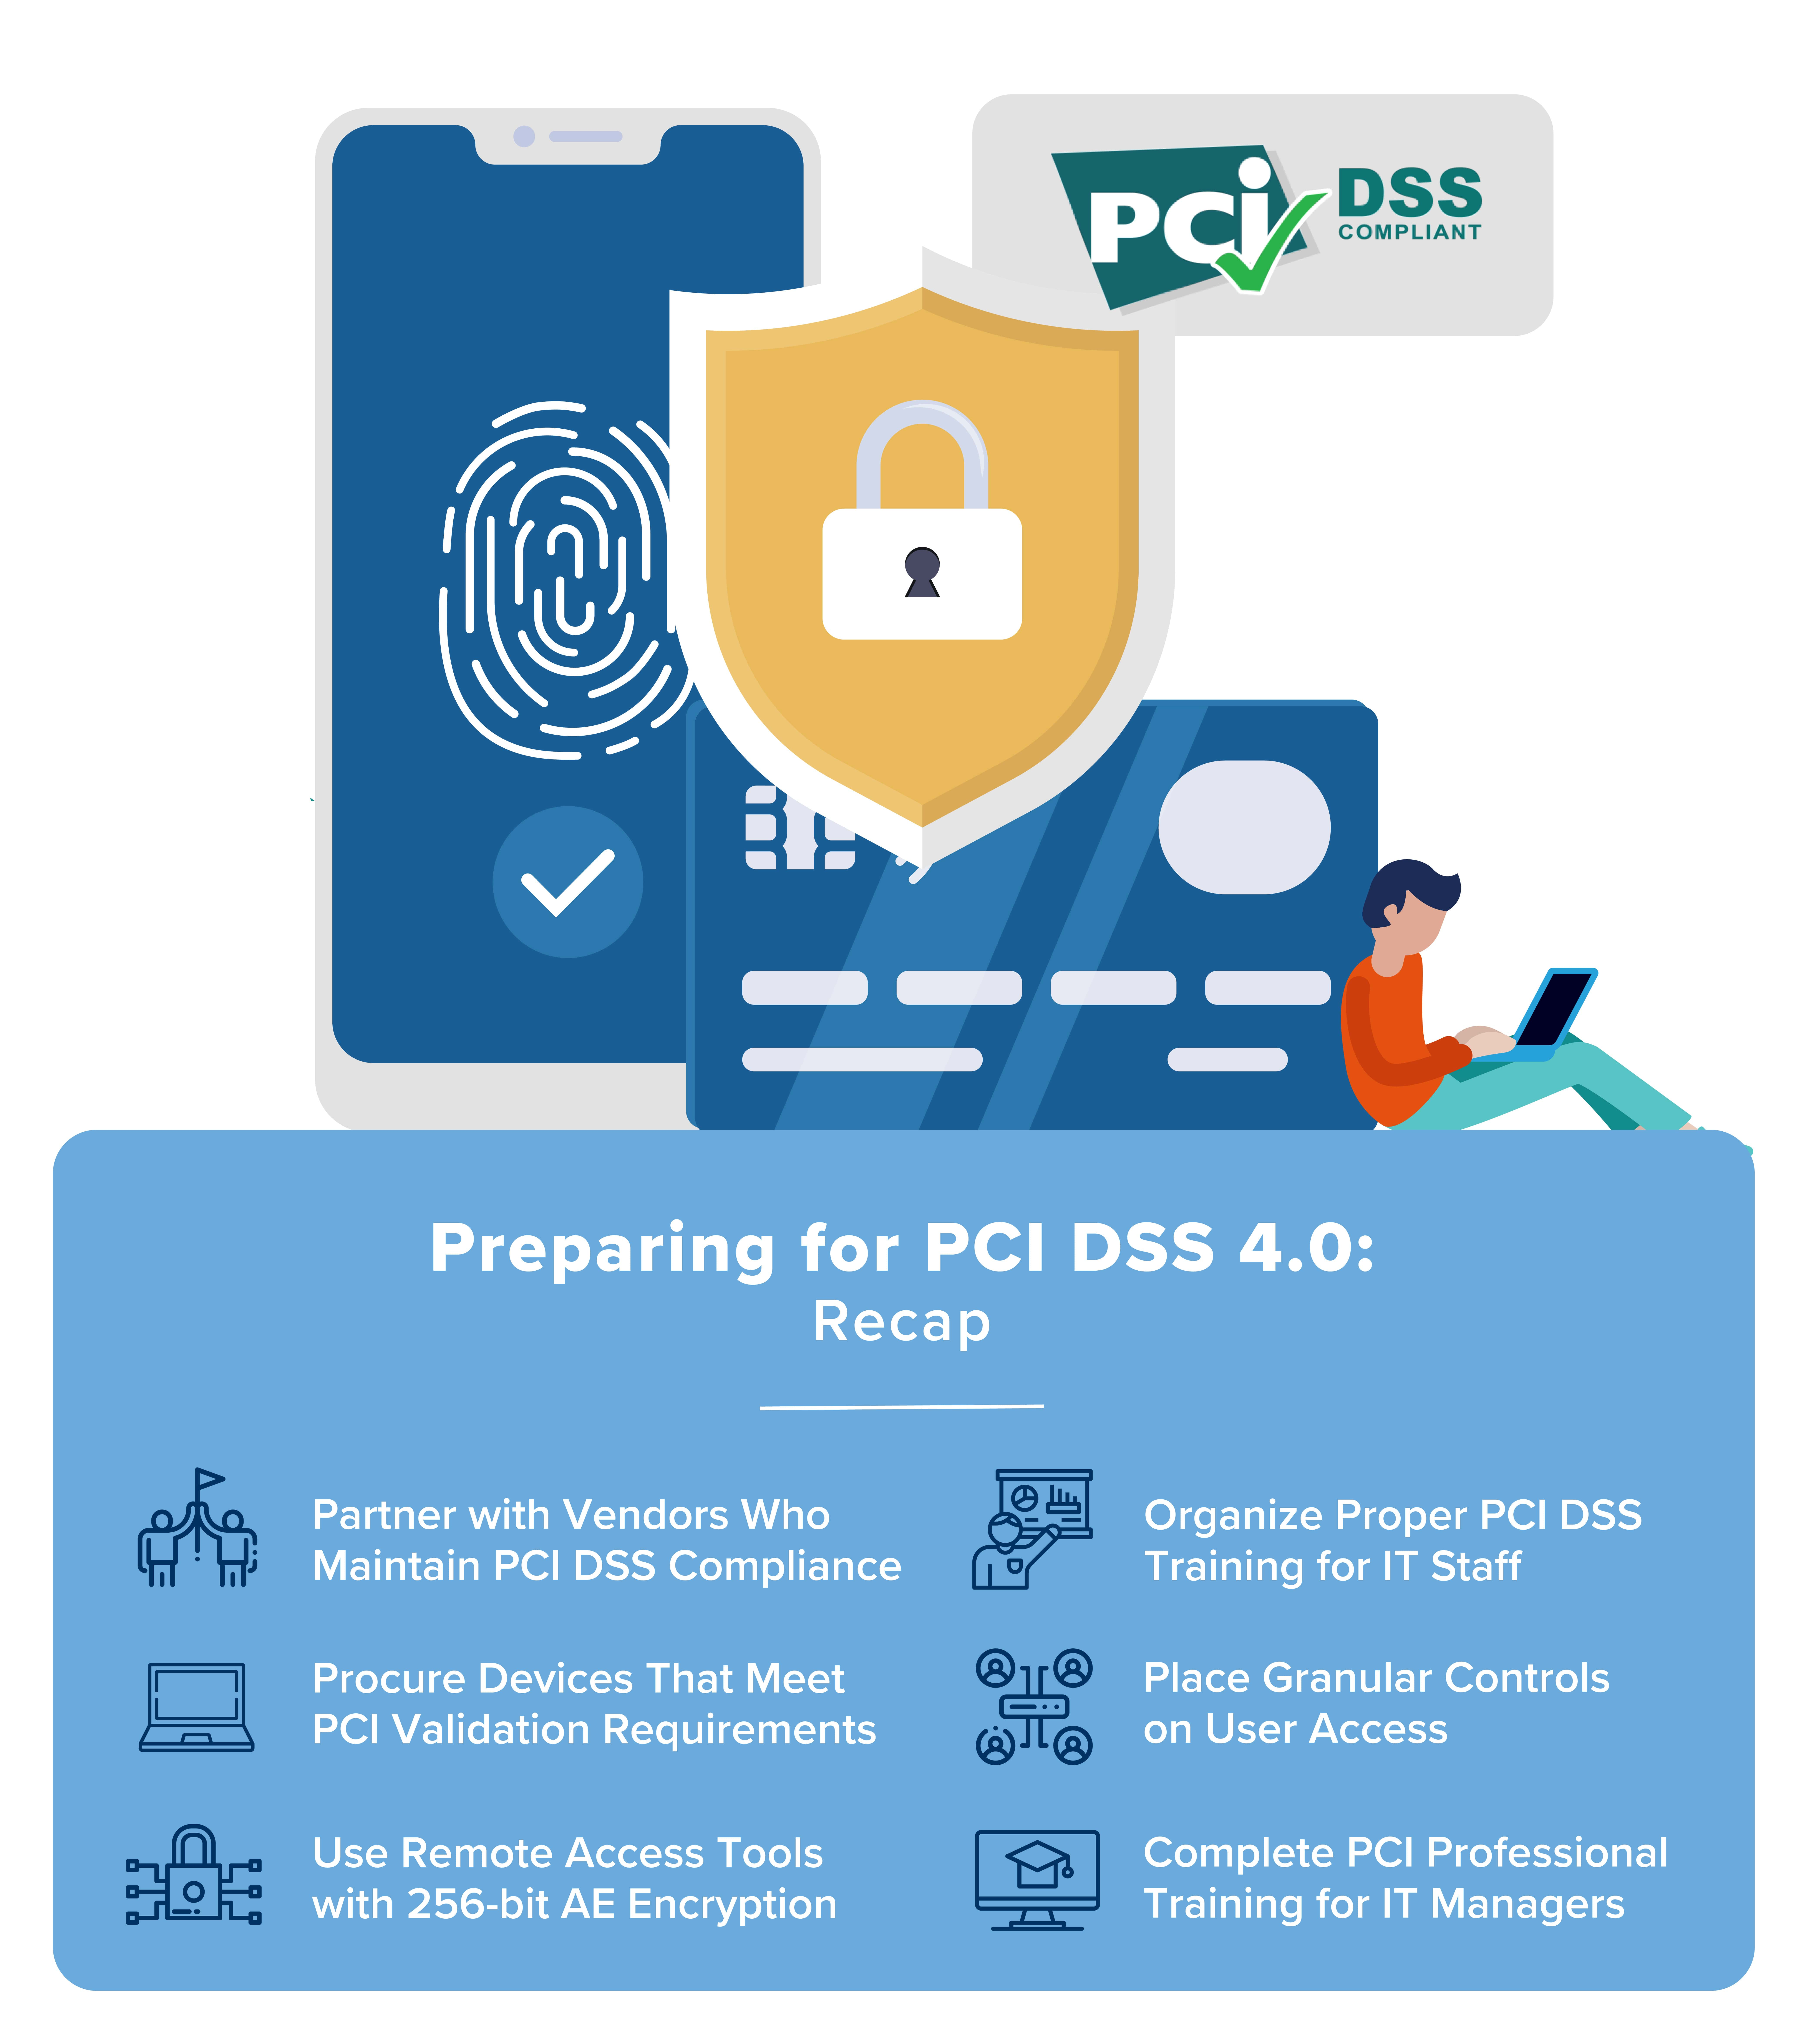 graphic showing a recap of how to prepare for PCI DSS 4.0